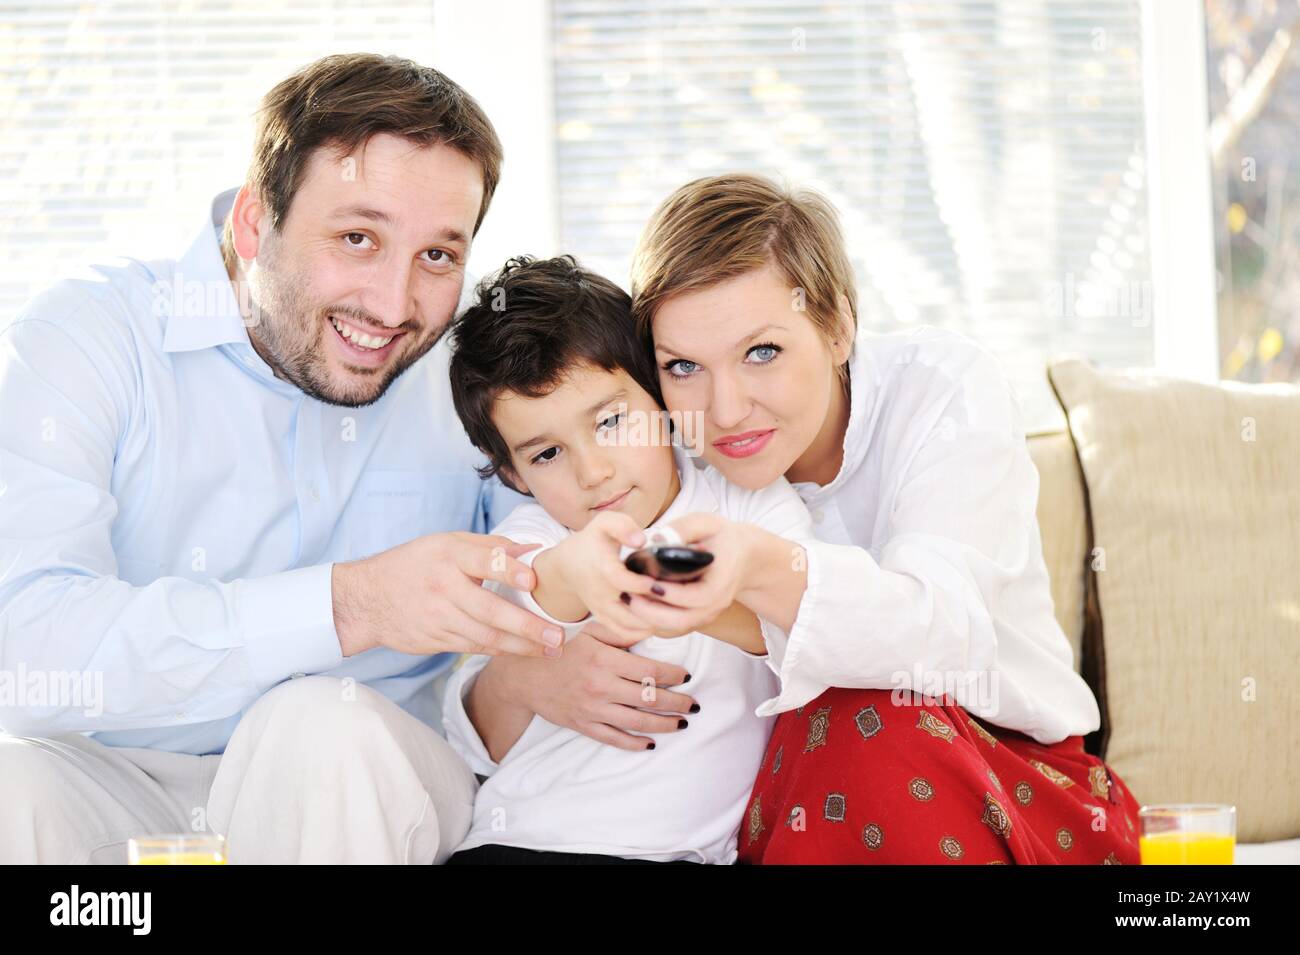 Family sitting in living room with remote control Stock Photo